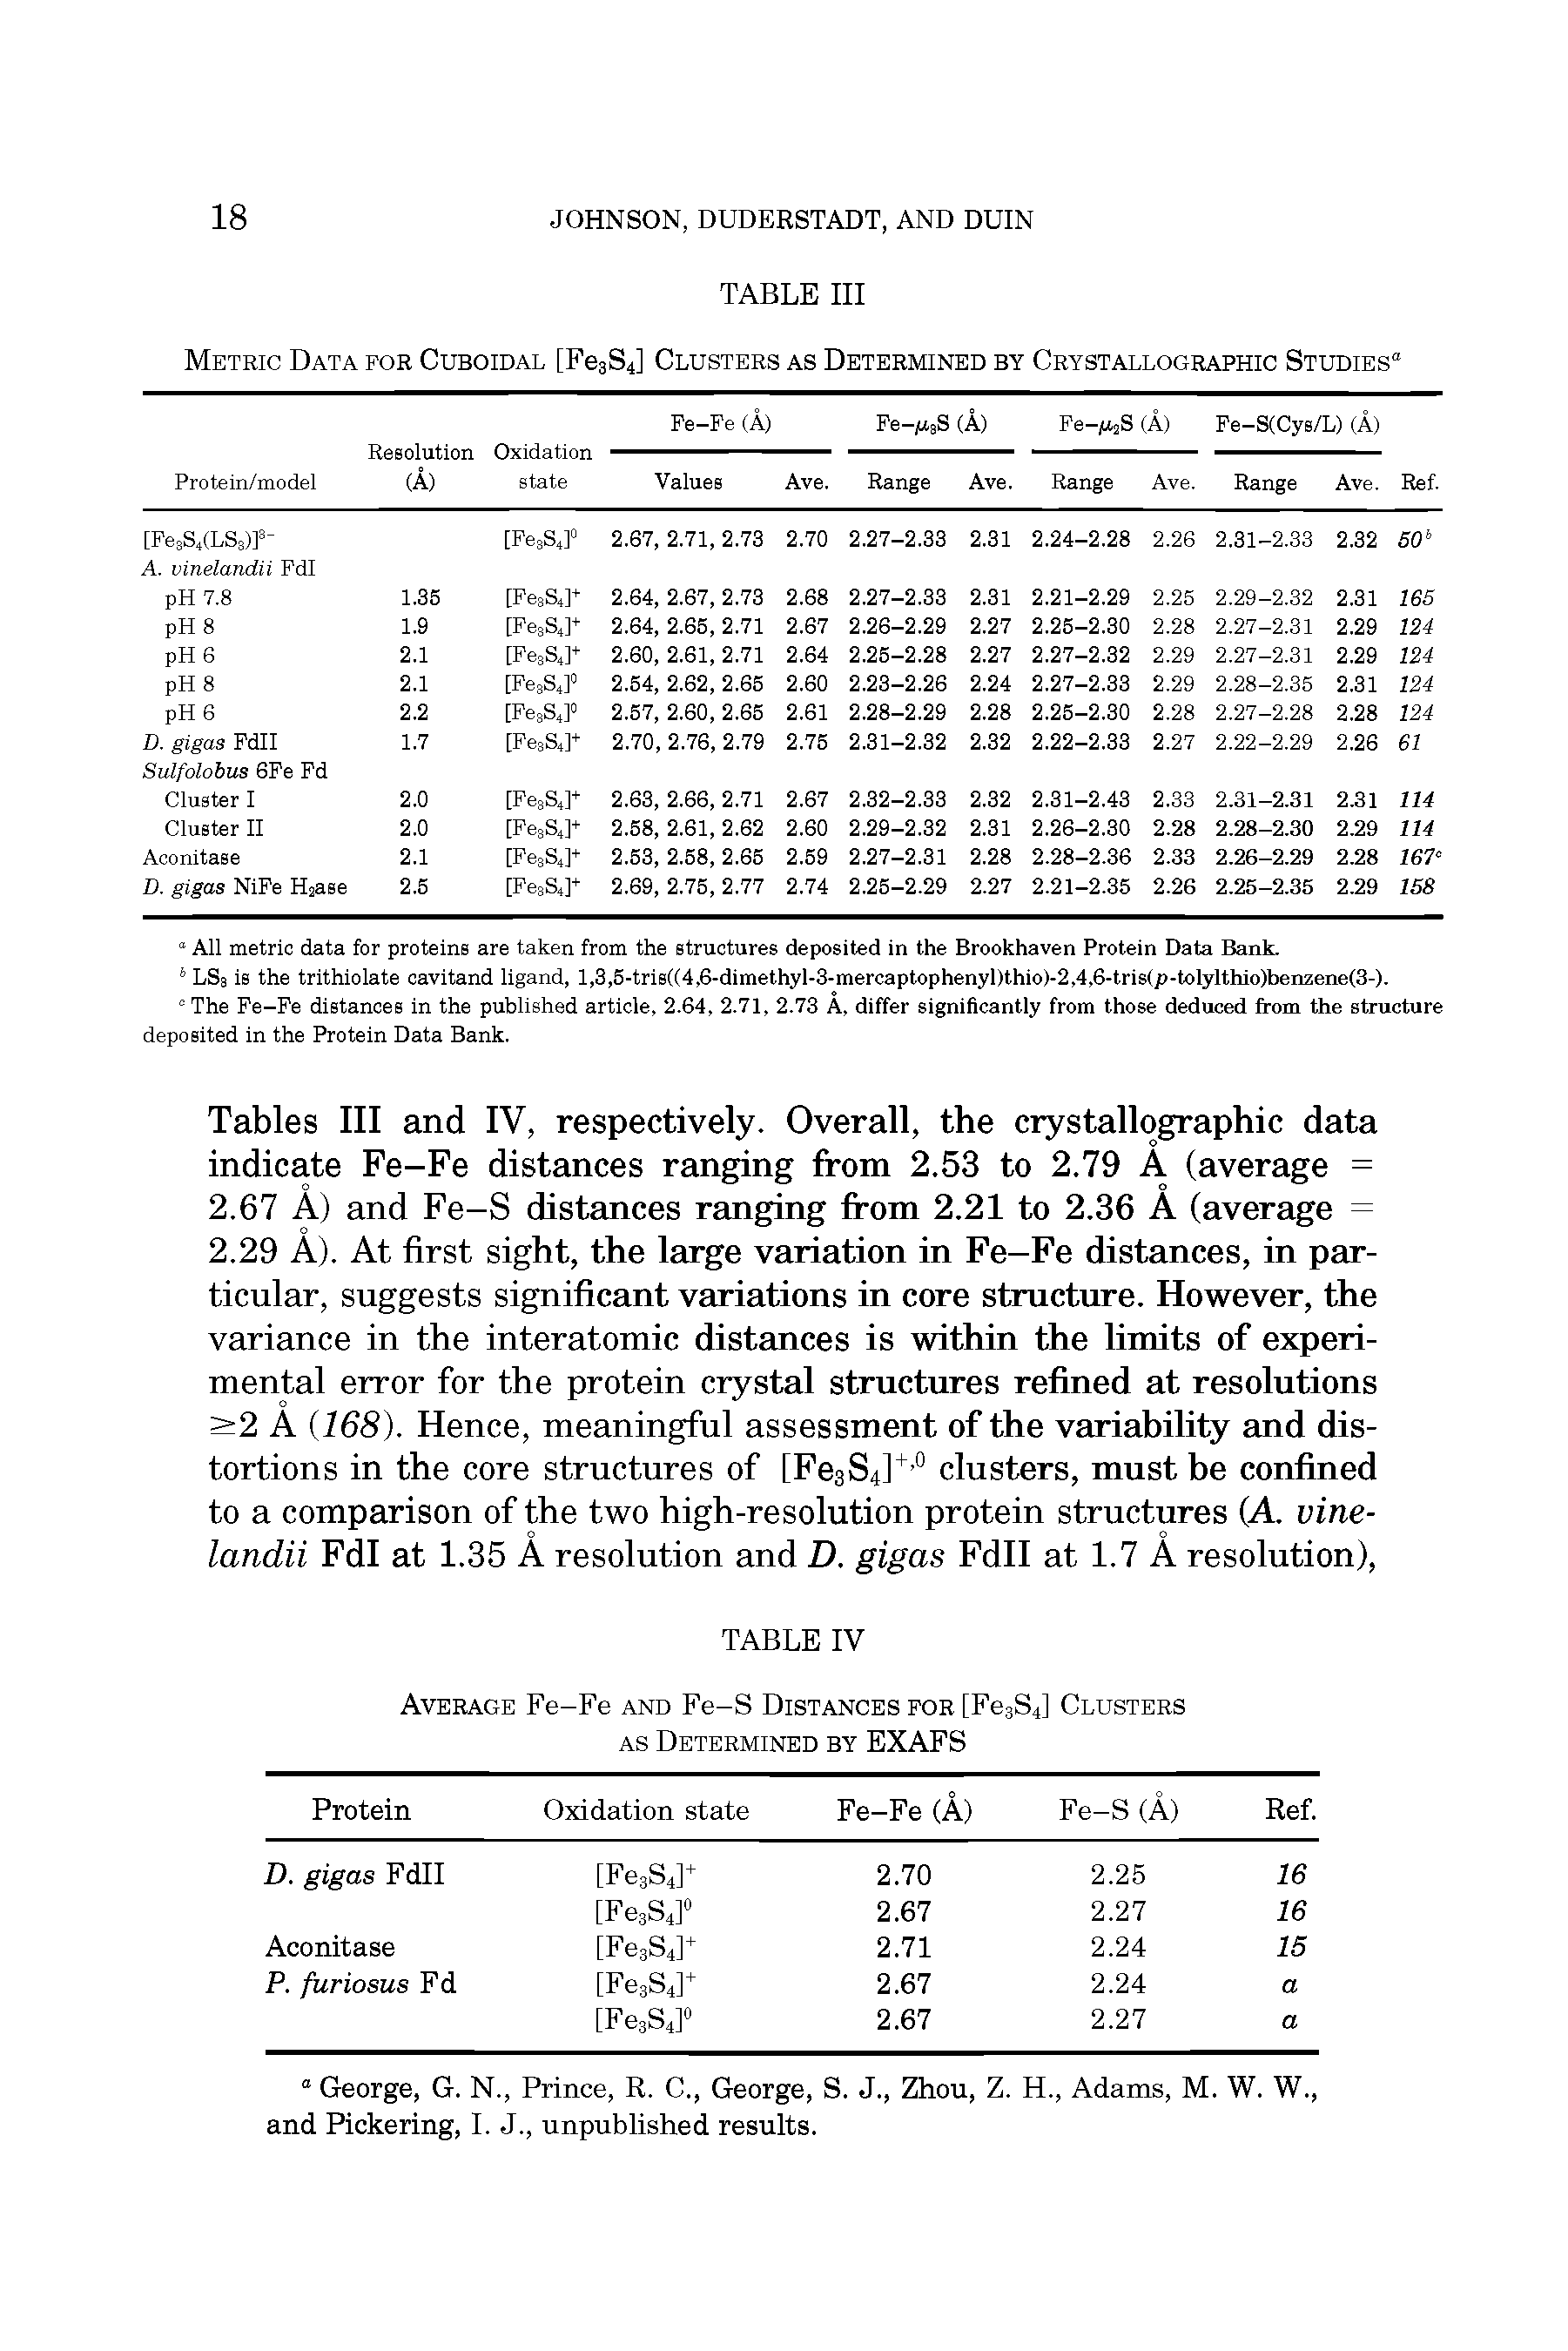 Tables III and IV, respectively. Overall, the crystallographic data indicate Fe-Fe distances ranging from 2.53 to 2.79 A (average =...